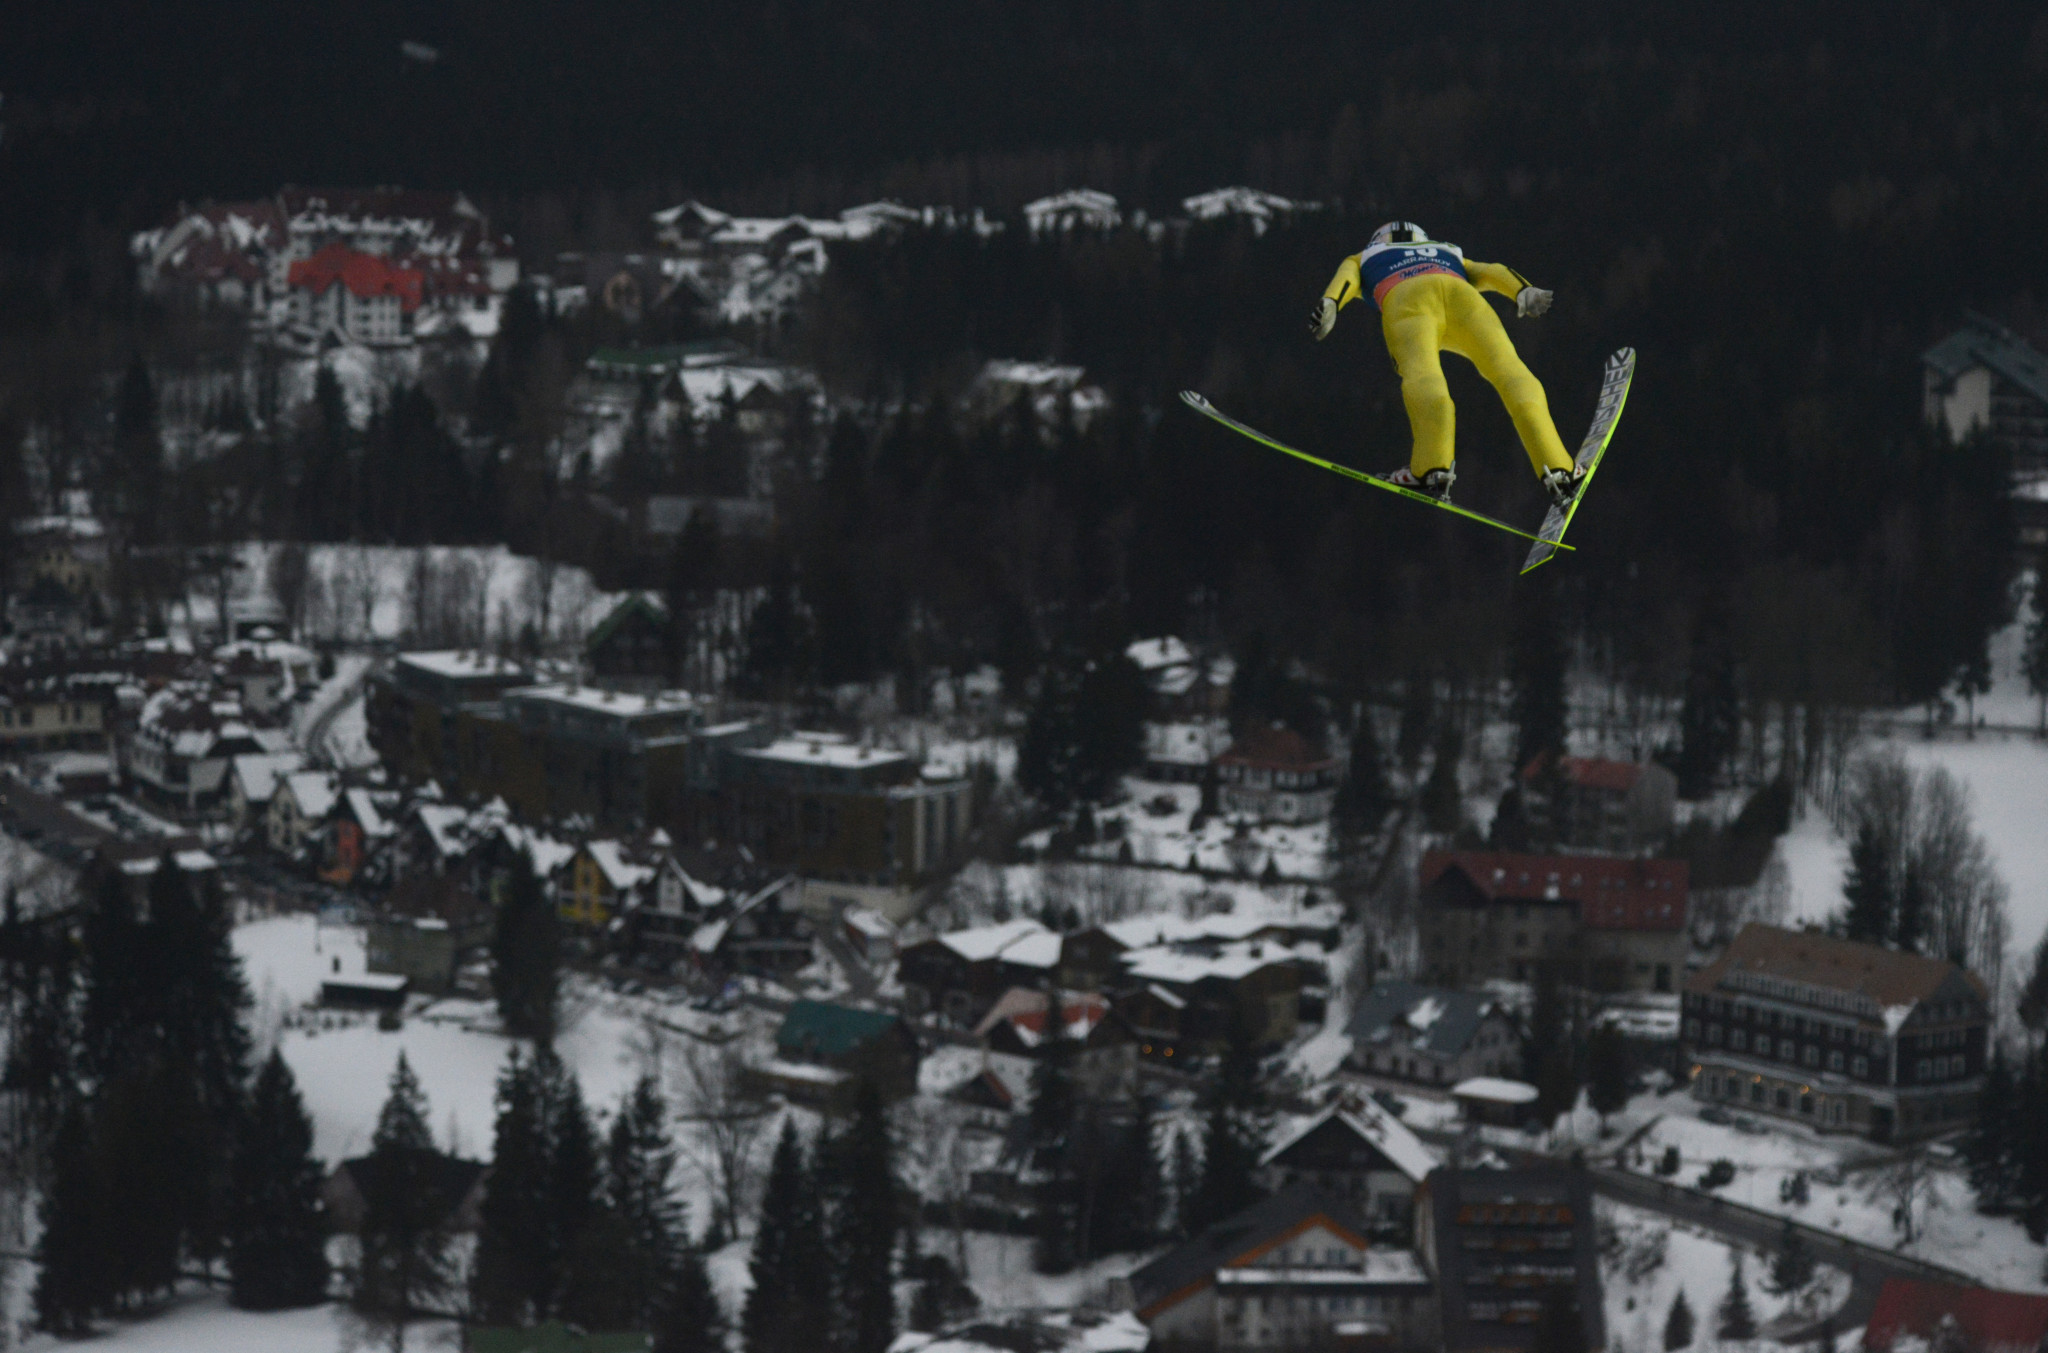 The Czech venue is known for its ski flying hill ©Getty Images